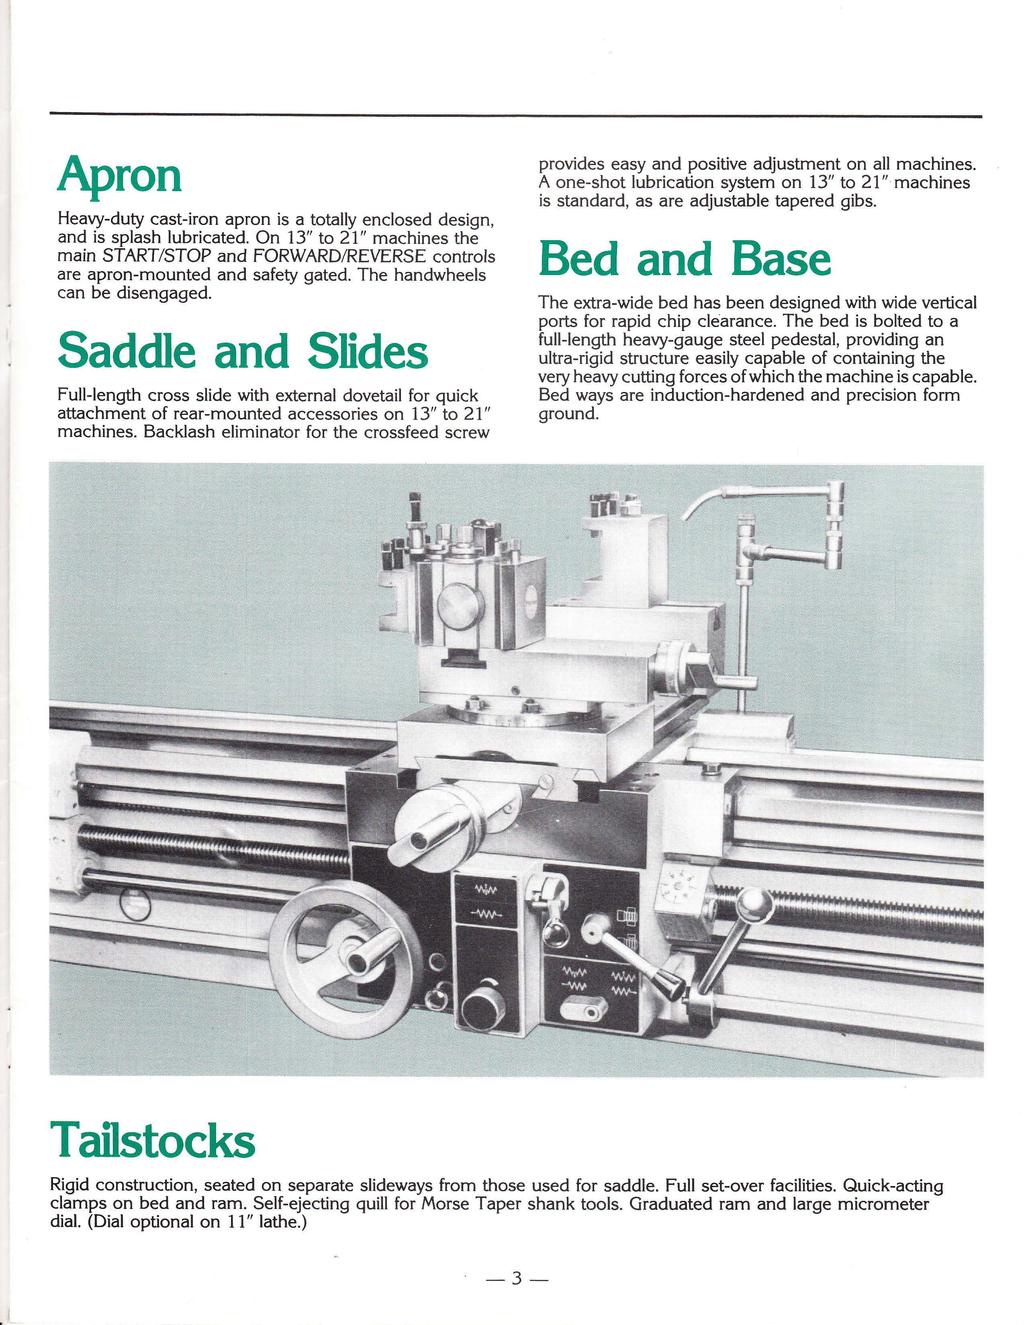 Apron provides easy and positive adjustment on all machines. A one-shot lubrication system on 13 to 21 machines is standard, as are adjustable tapered gibs.